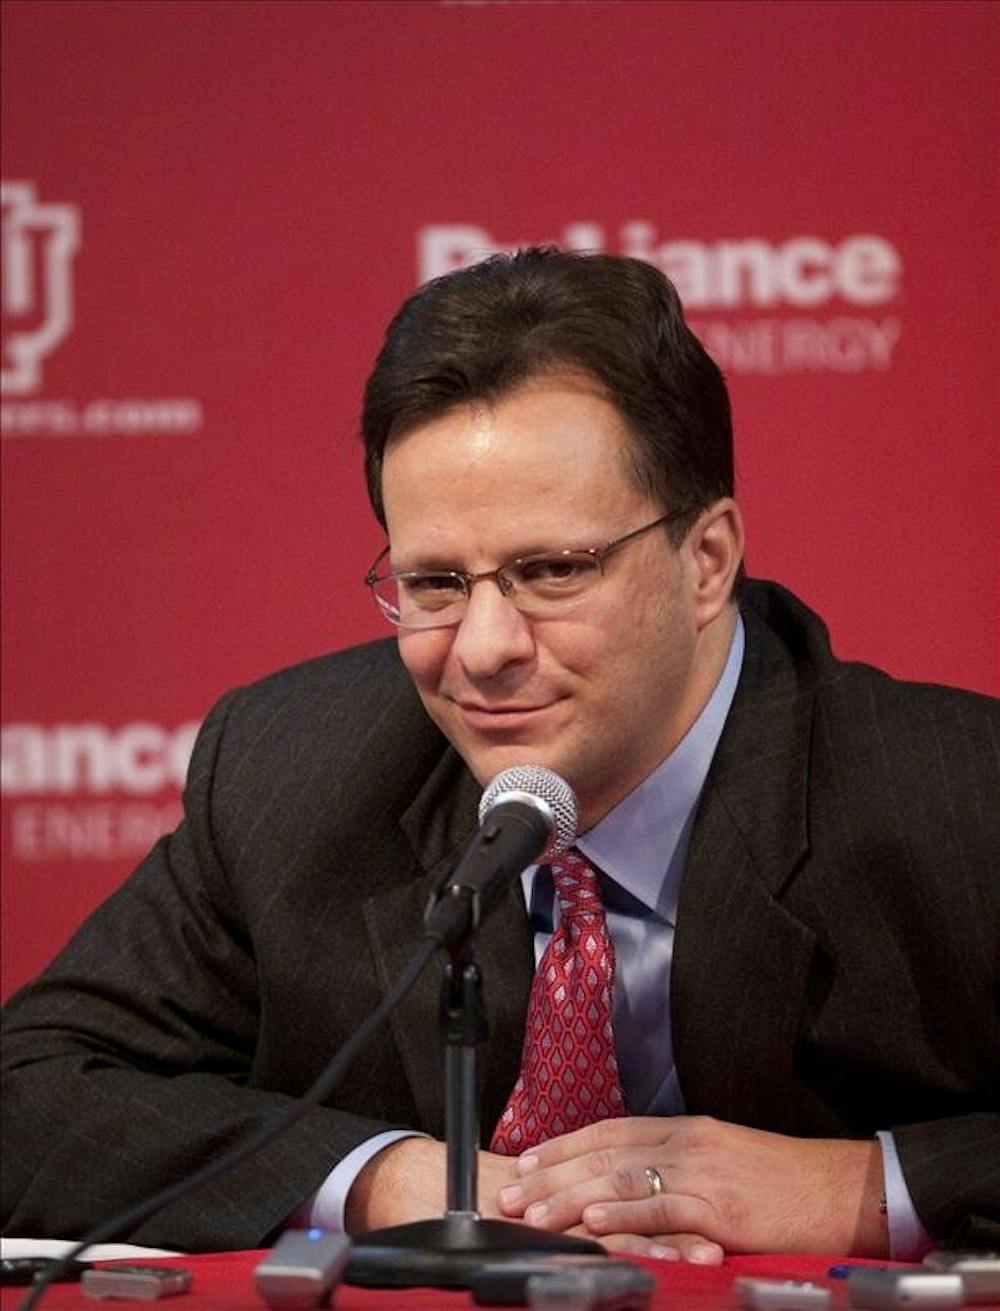 Coach Tom Crean smirks while speaking to the media after his first Big 10 victory as IU's head coach Wednesday evening at Assembly Hall.  The Hoosiers defeated the Iowa Hawkeyes 68-60.